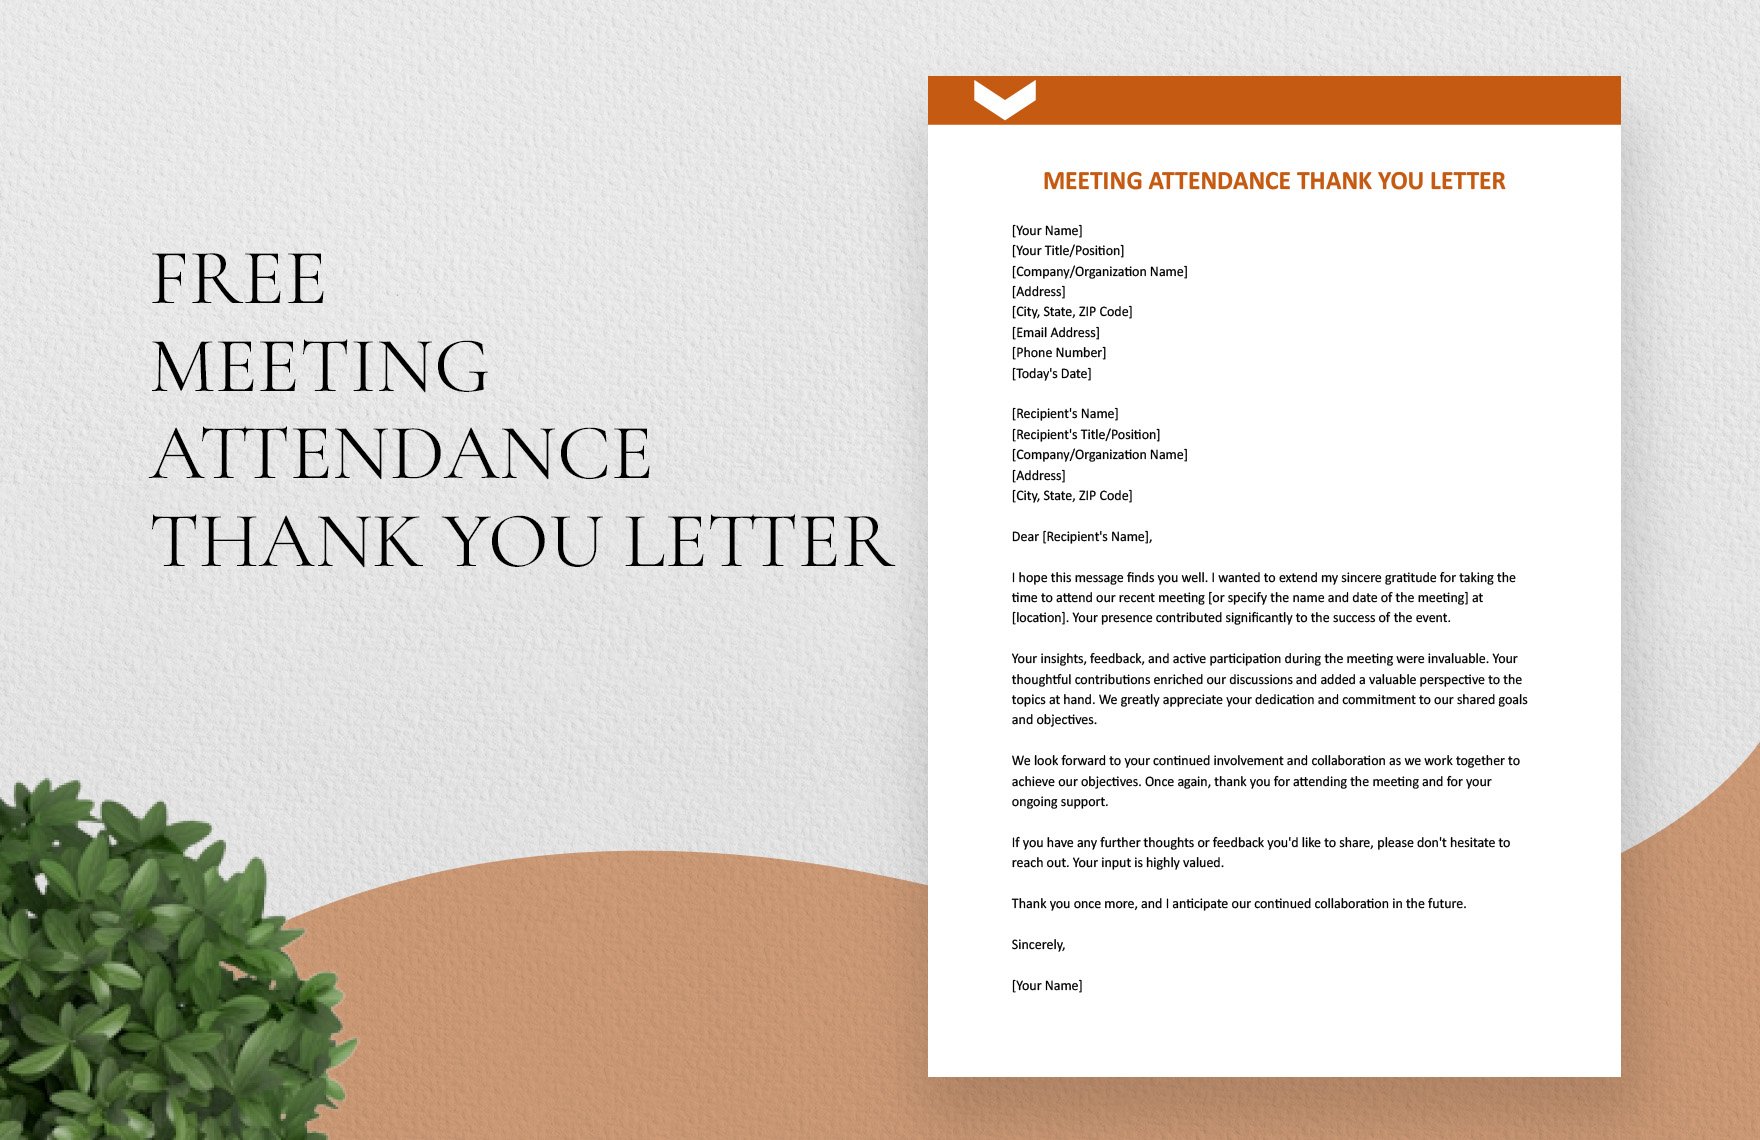 Meeting Attendance Thank You Letter